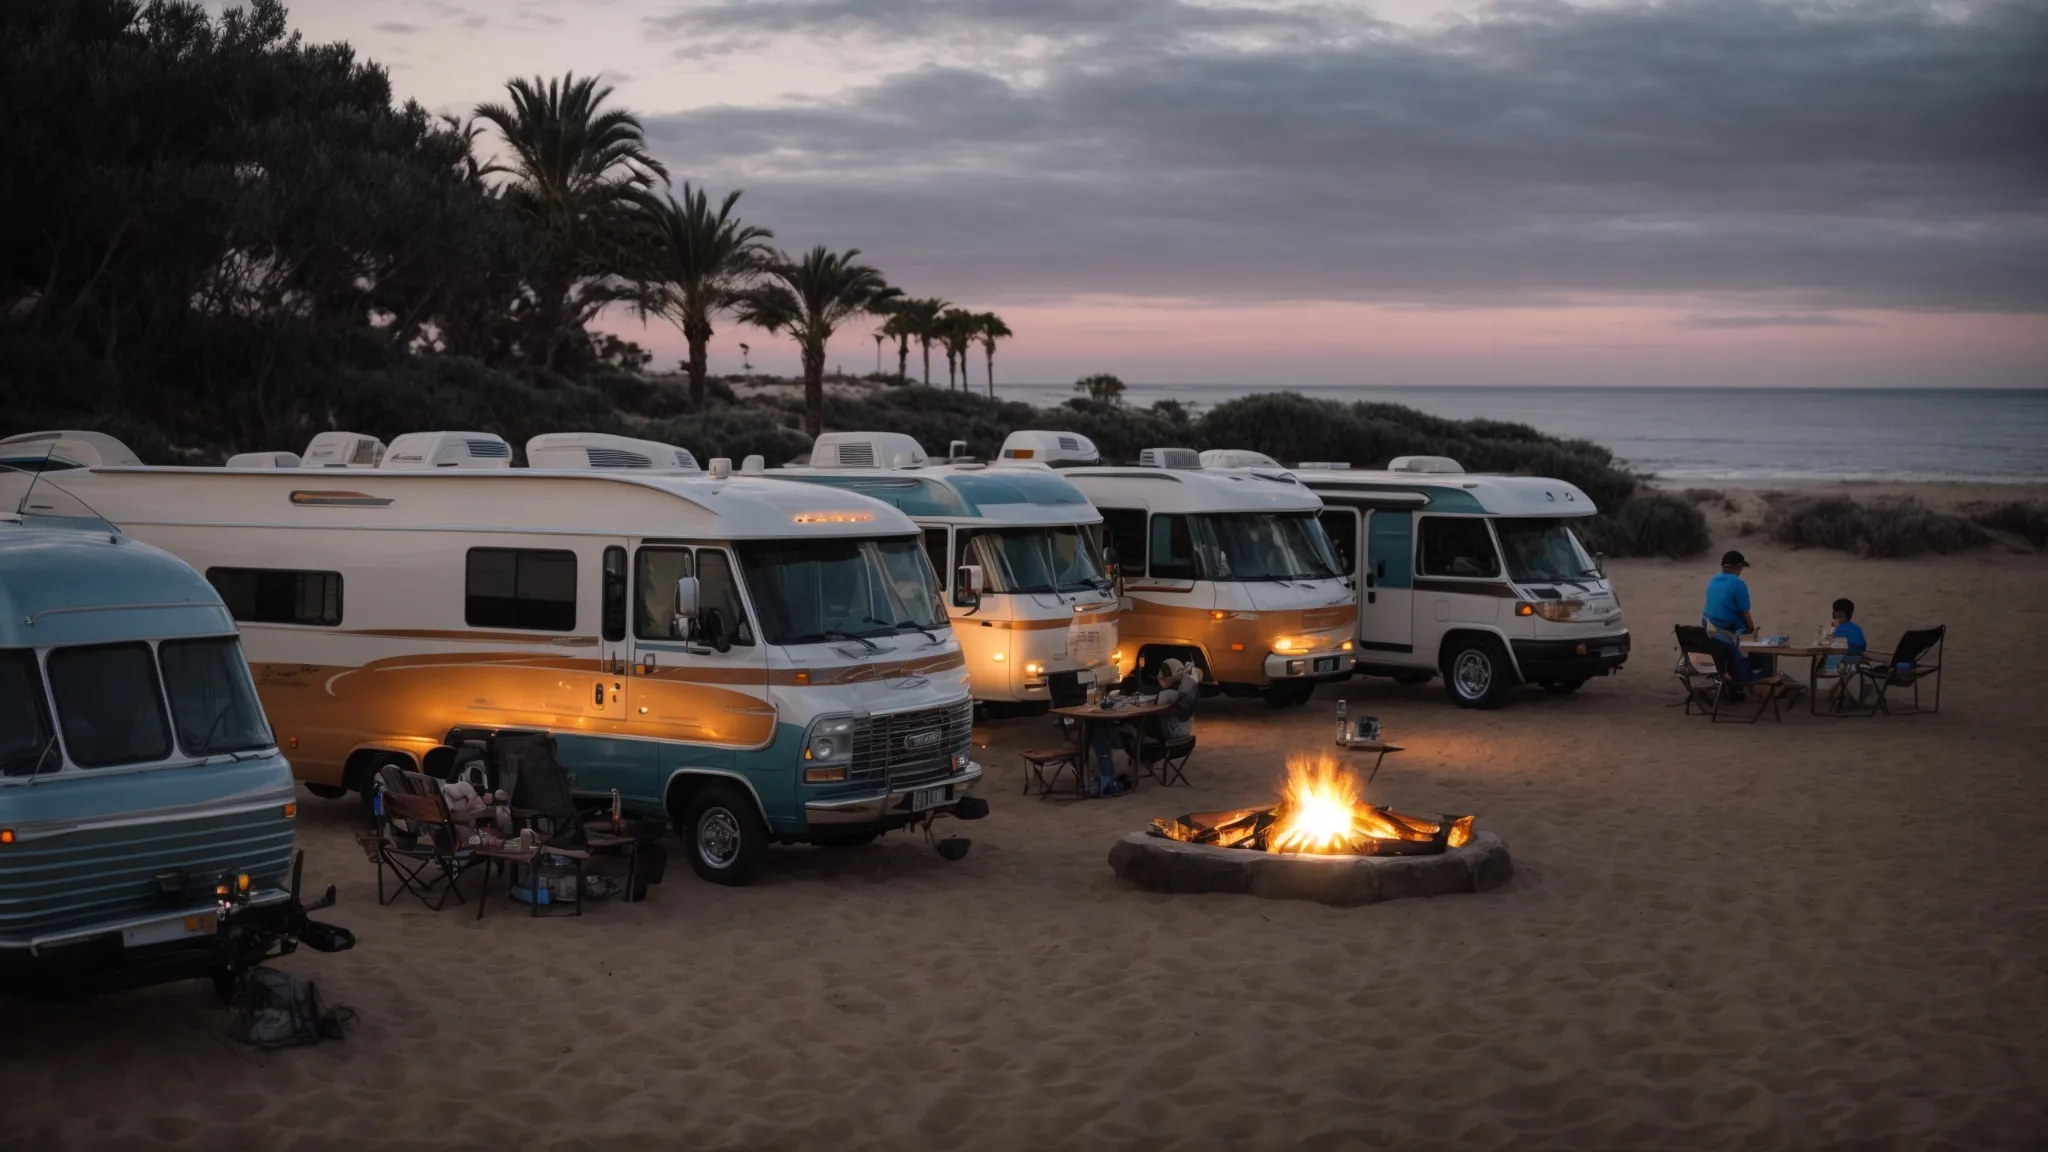 recreational vehicles parked in a picturesque row overlooking a serene san diego beach, with families enjoying nearby campfires as the sun sets.